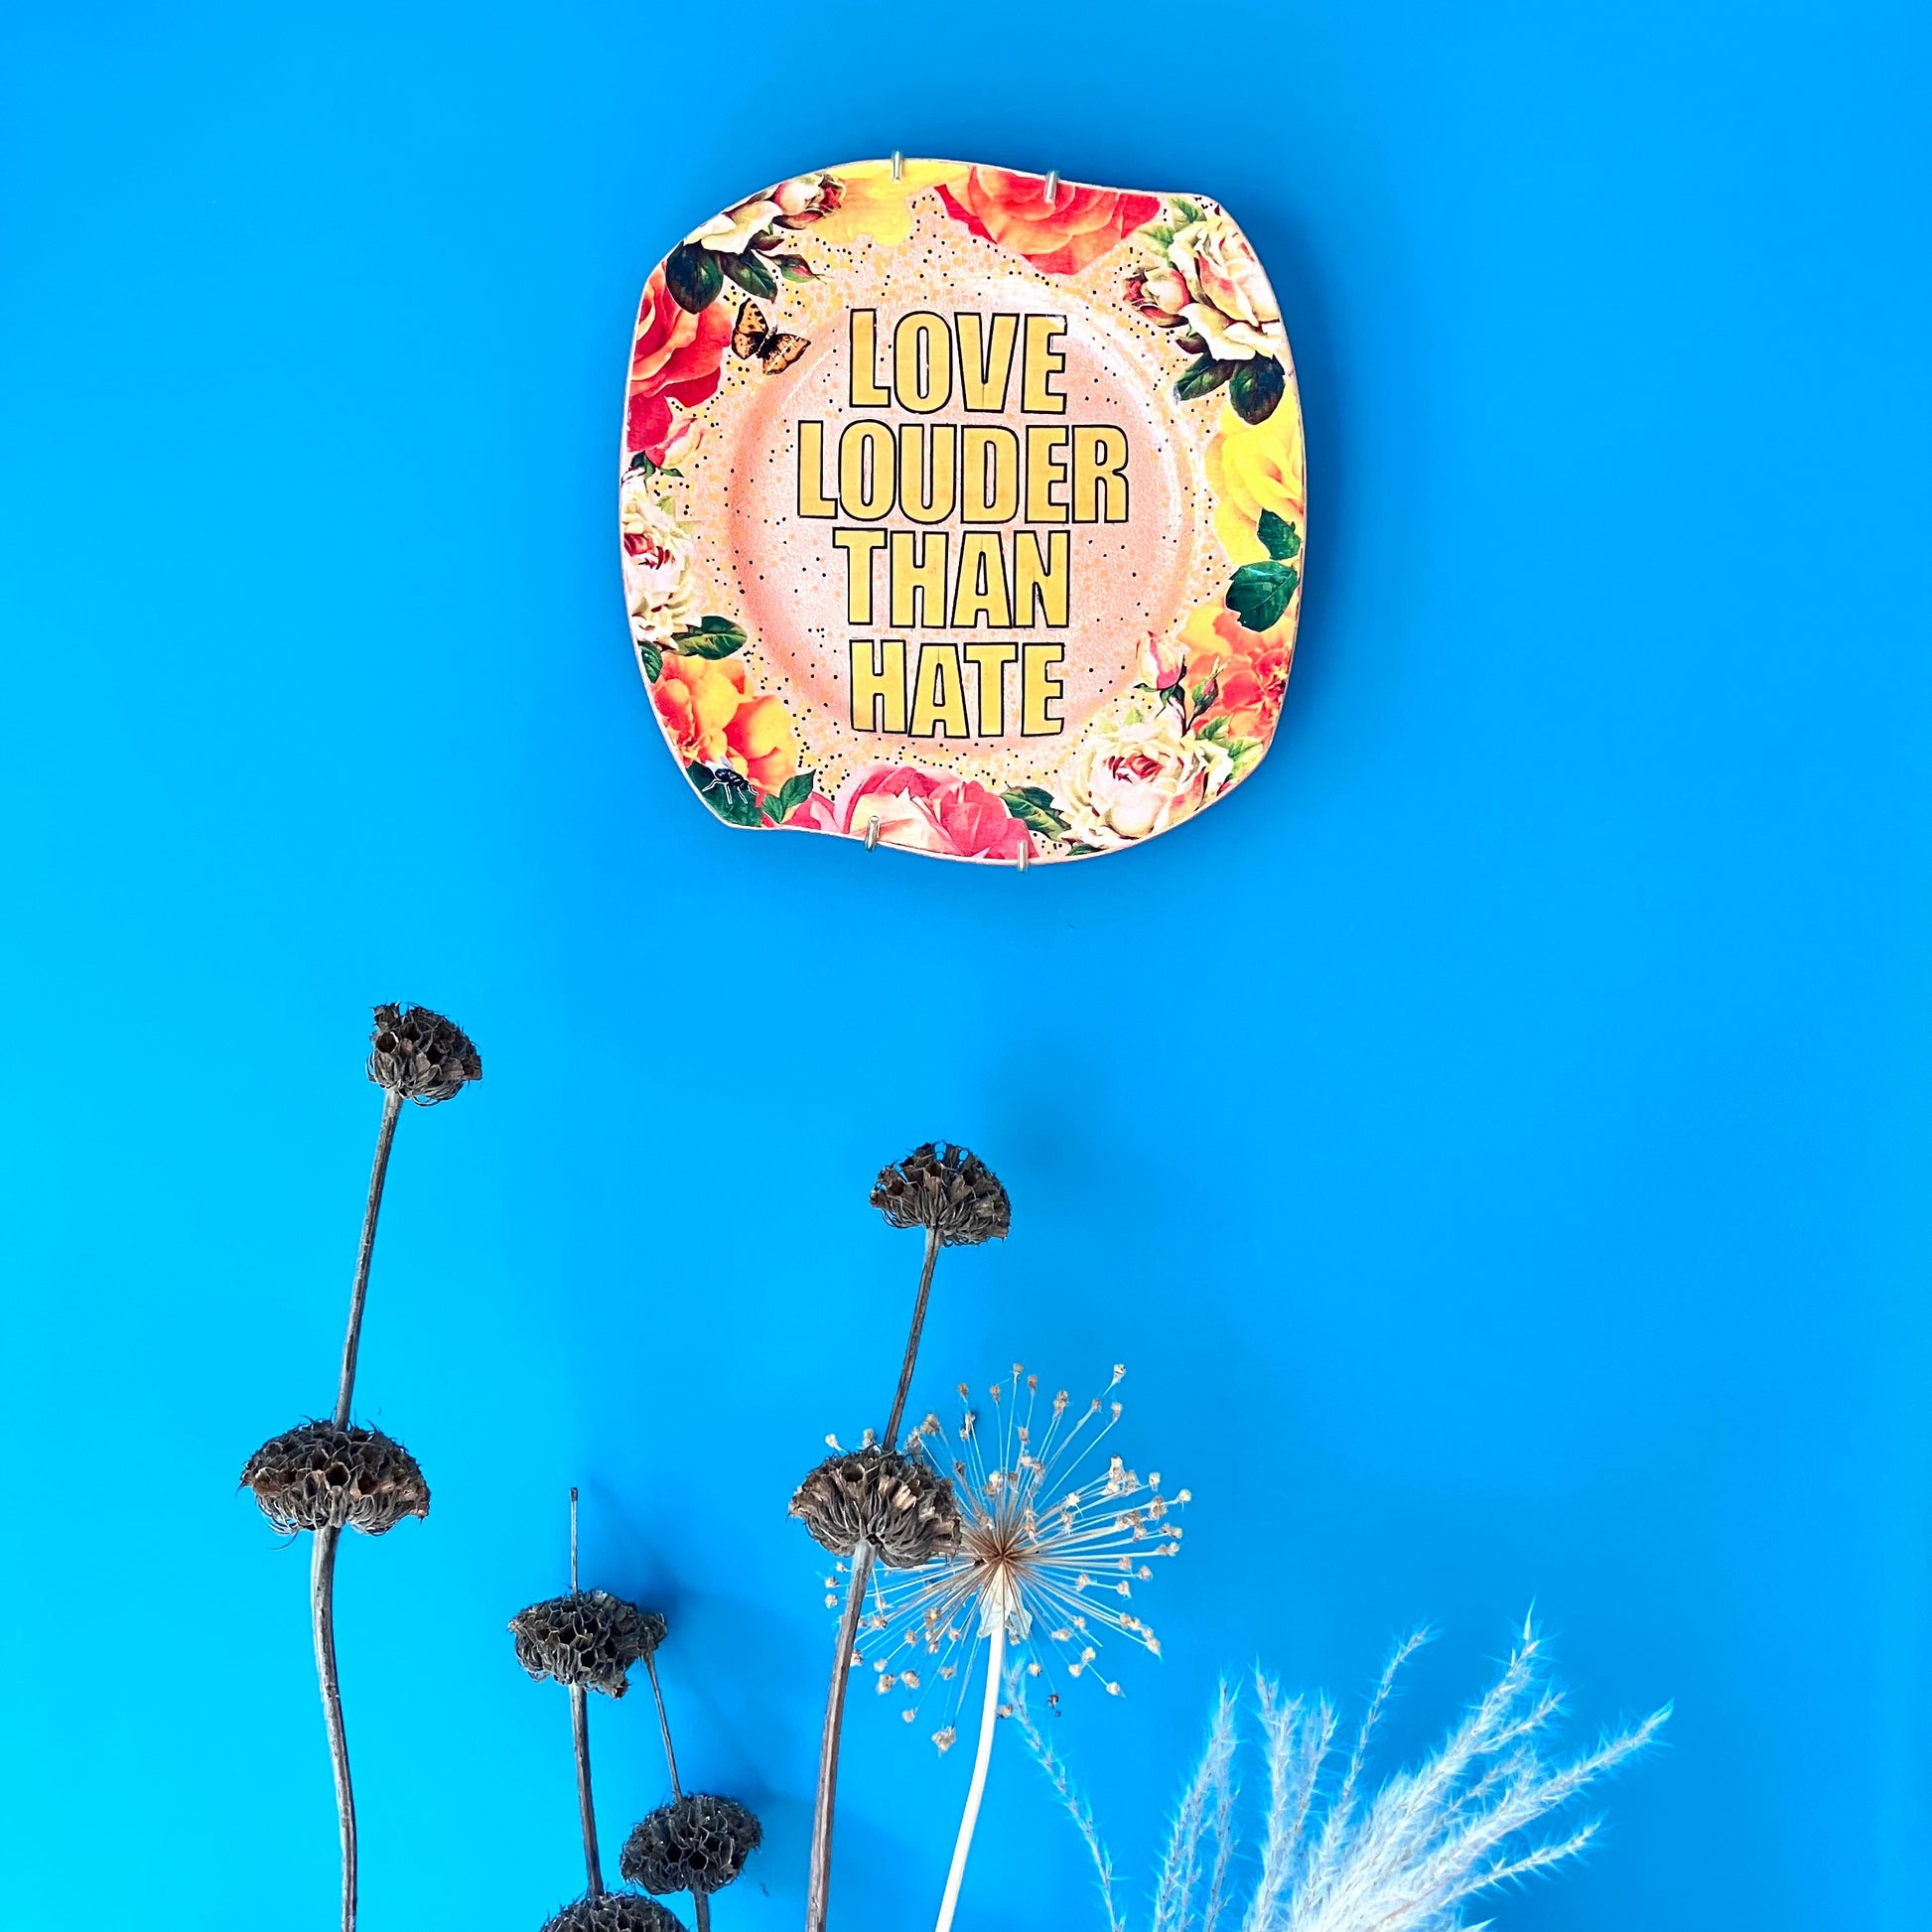 "Love Louder Than Hate" Upcycled Wall Plate by House of Frisson, featuring a collage of the words "love louder than hate" set against a peach background and framed by roses. Plate hanging on a blue wall.